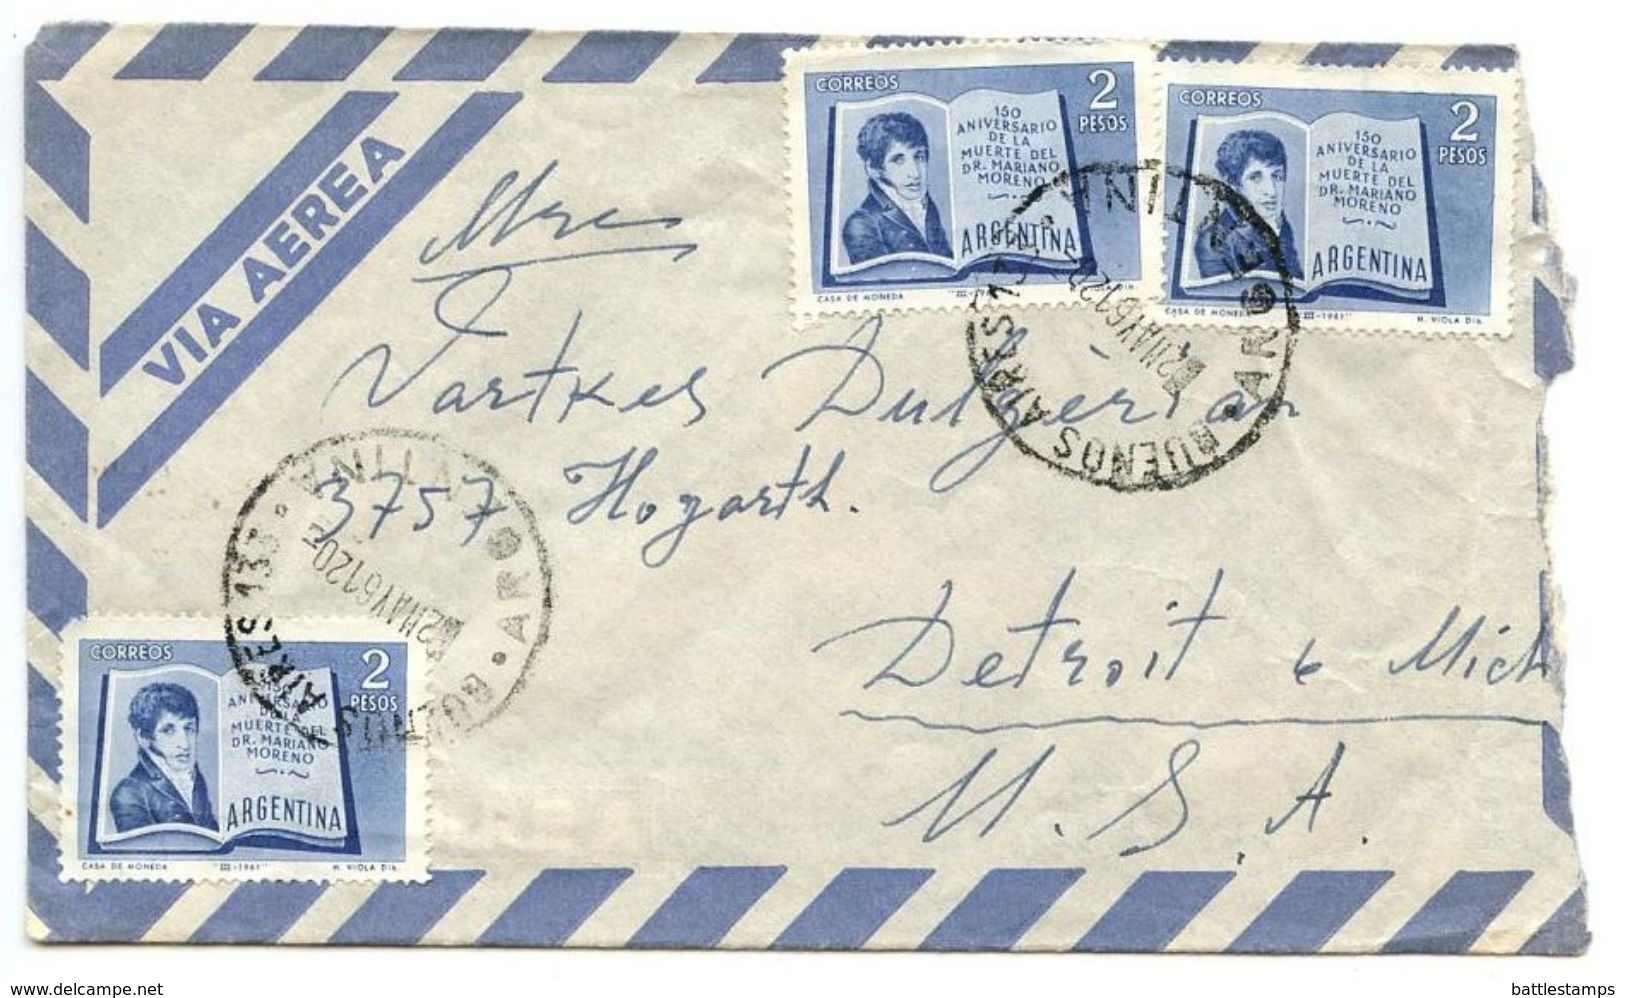 Argentina 1961 Airmail Cover Buenos Aires To Detroit, Michigan W/ Scott 726 X 3 - Covers & Documents